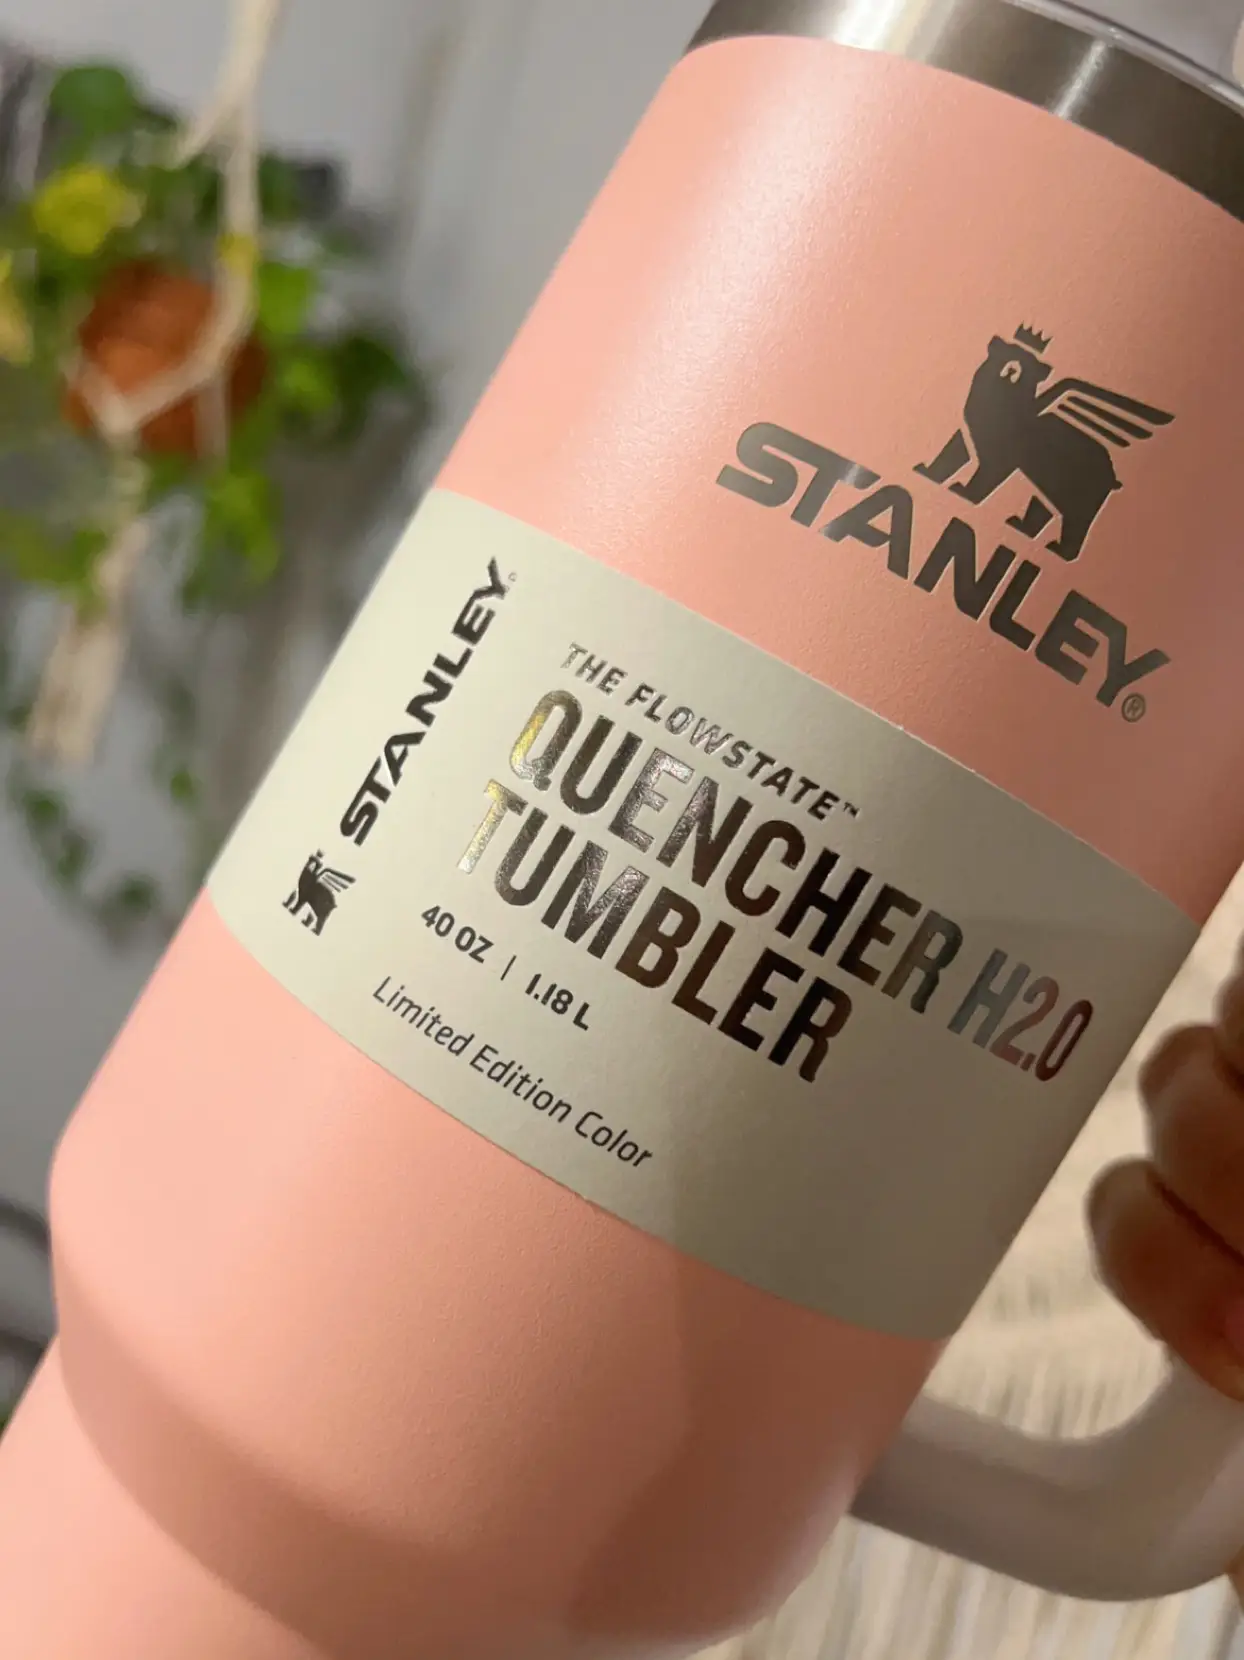 My 1st Stanley!! Peach color beautiful! @ivannamunoz5 #stanley #water